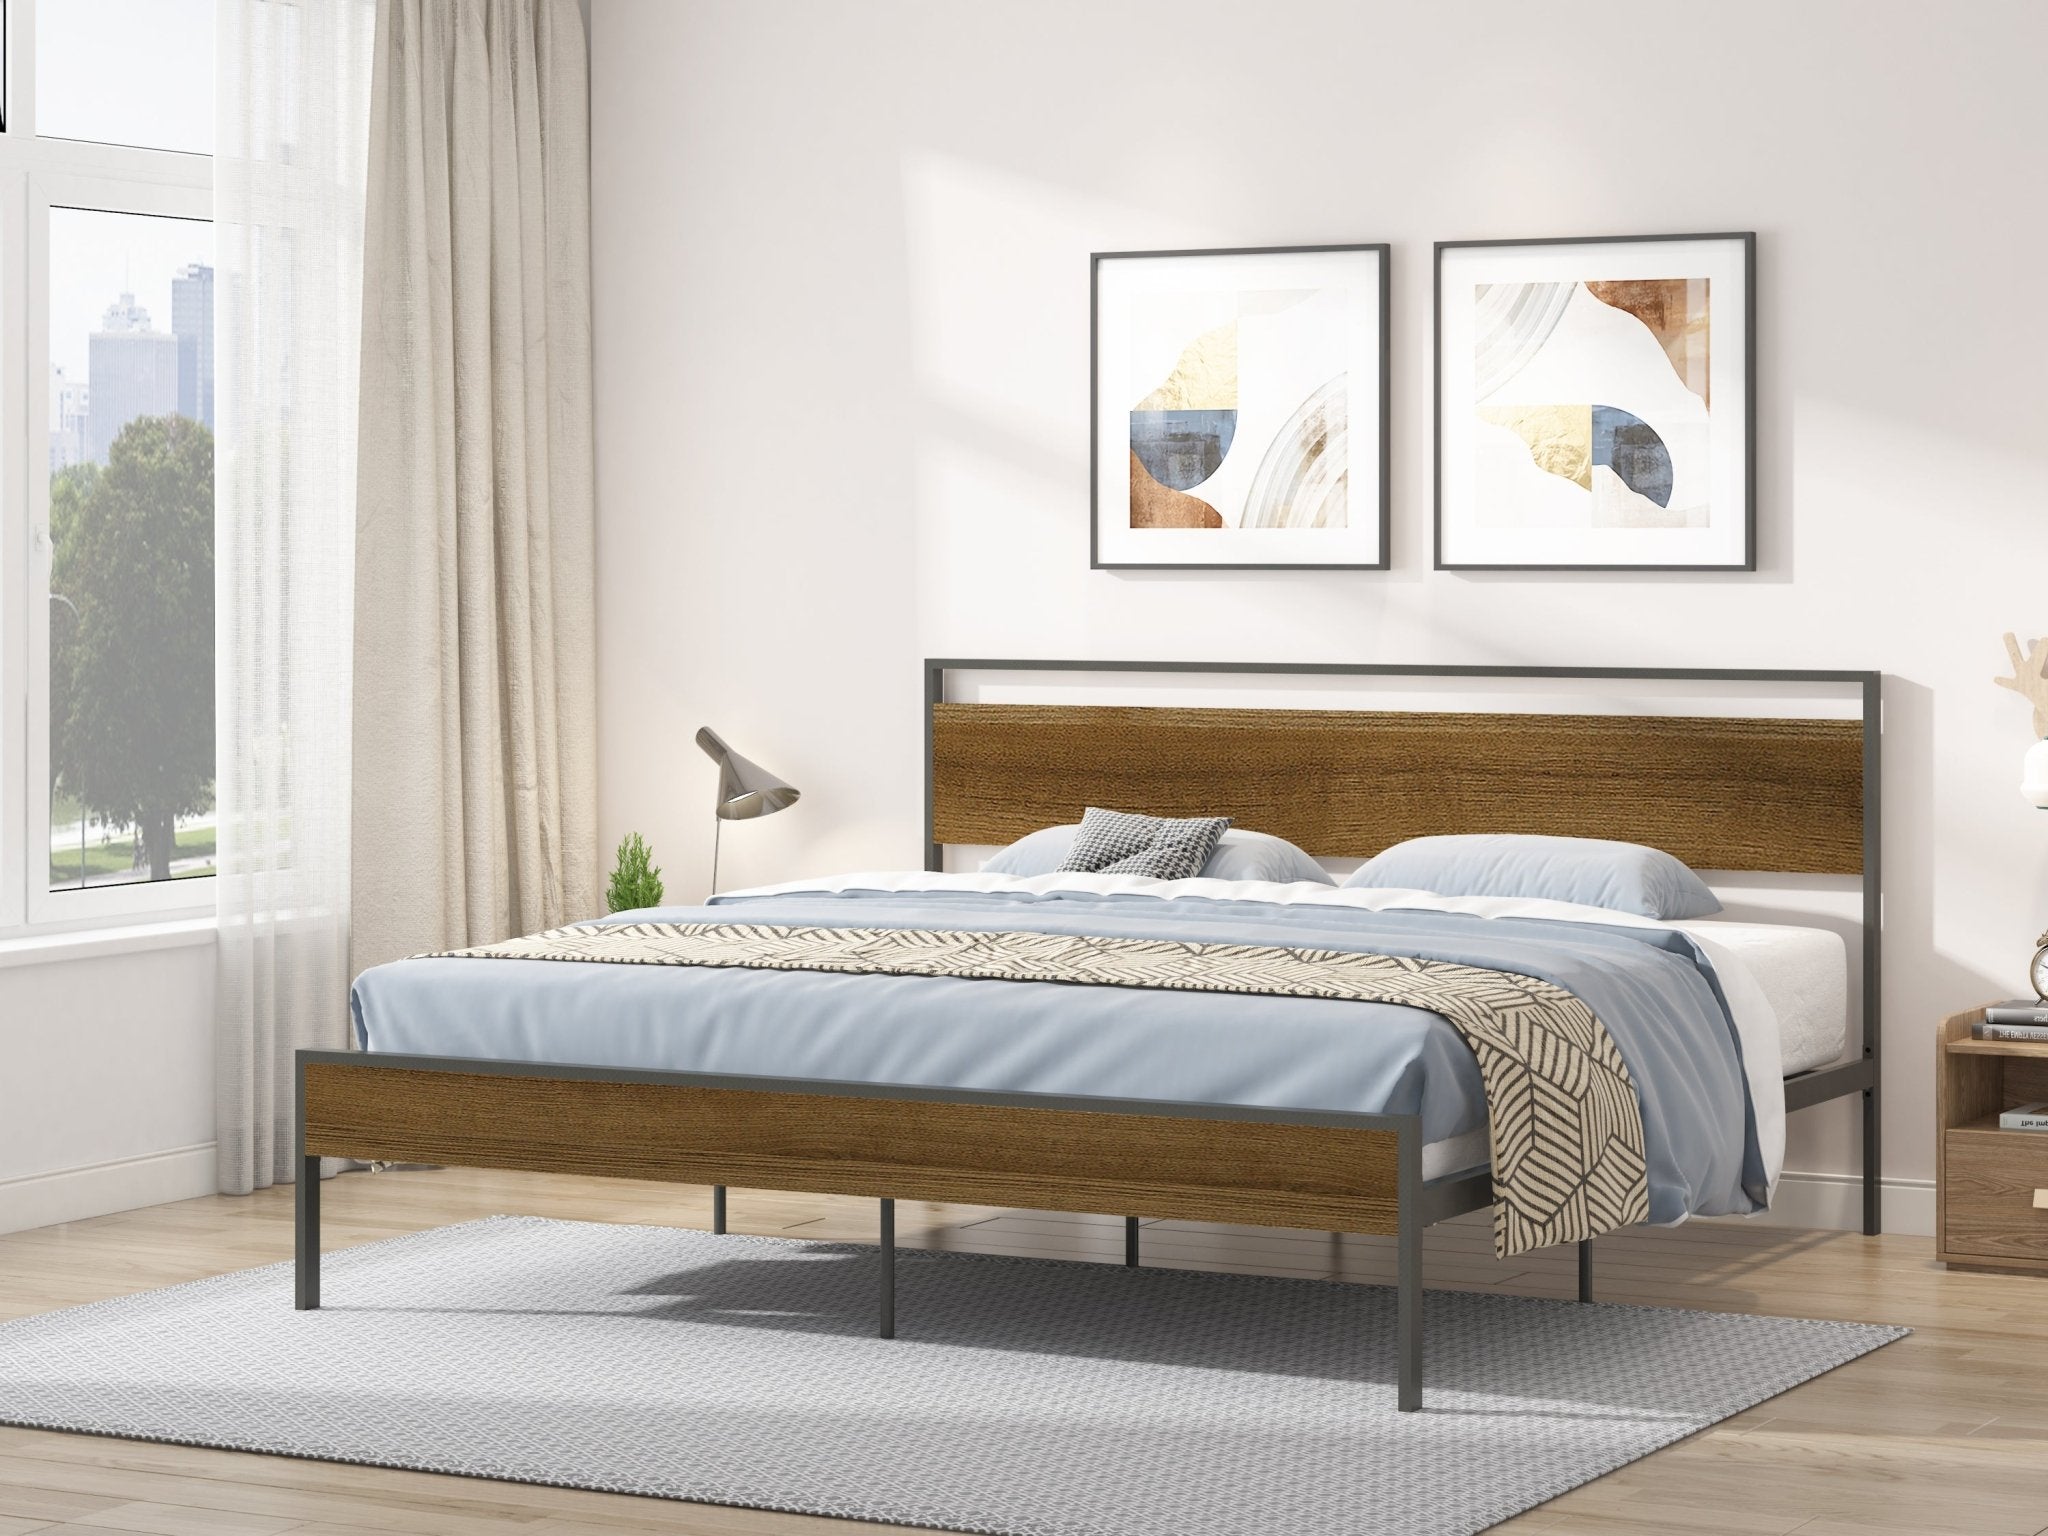 Ceres-Metal-Bed,-Black-with-Cinnamon-Wood-Headboard&Footboard,-King-Beds-&-Bed-Frames